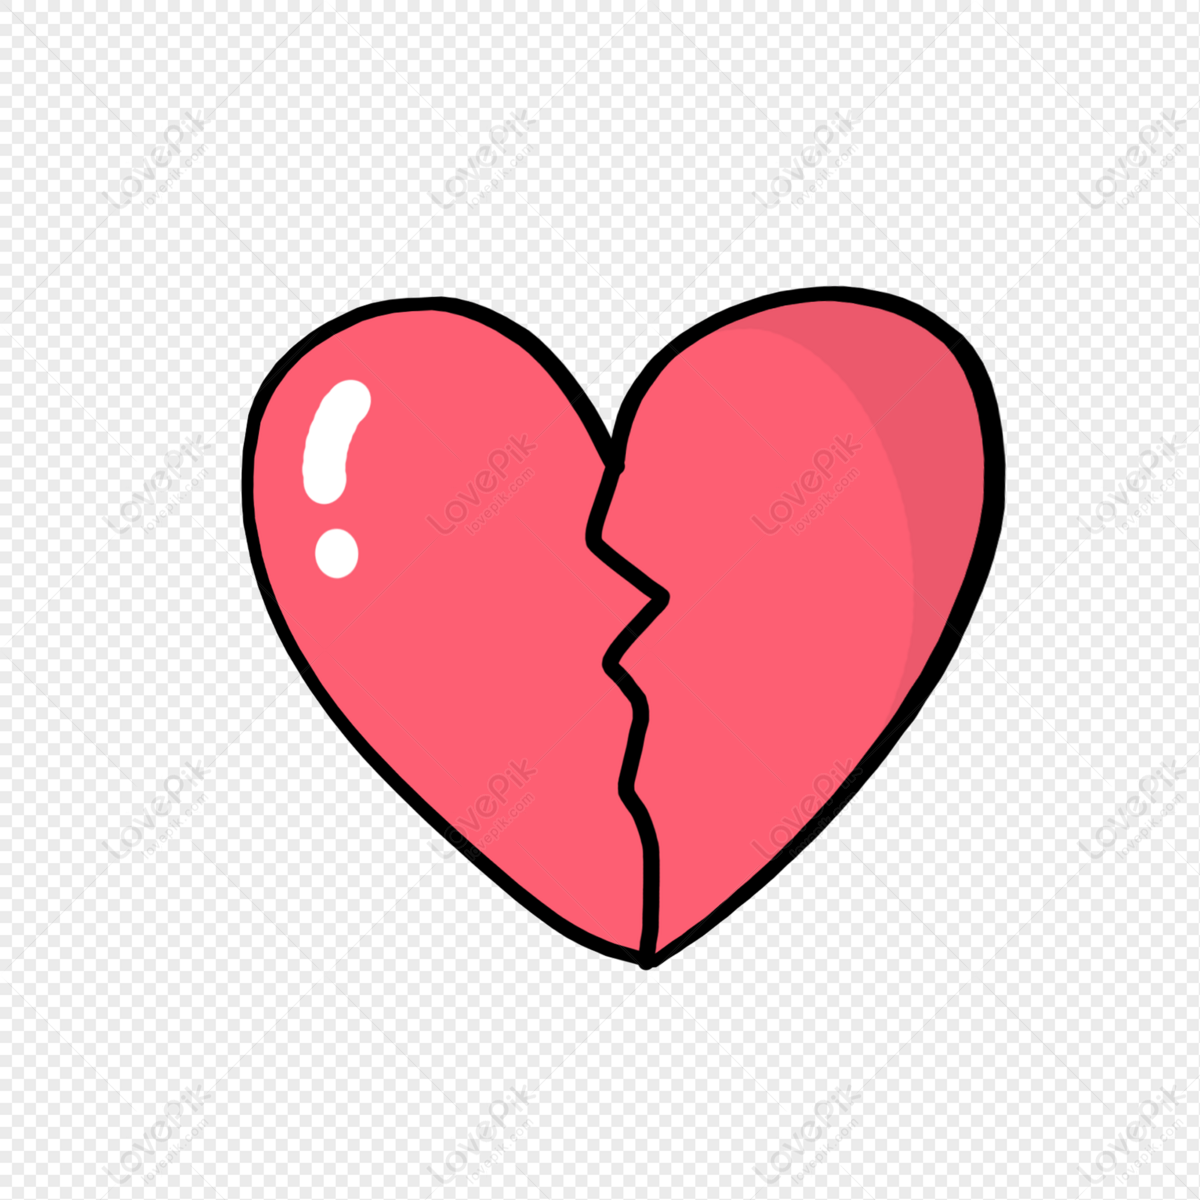 Broken Heart Cartoon PNG Picture And Clipart Image For Free Download -  Lovepik | 401180855